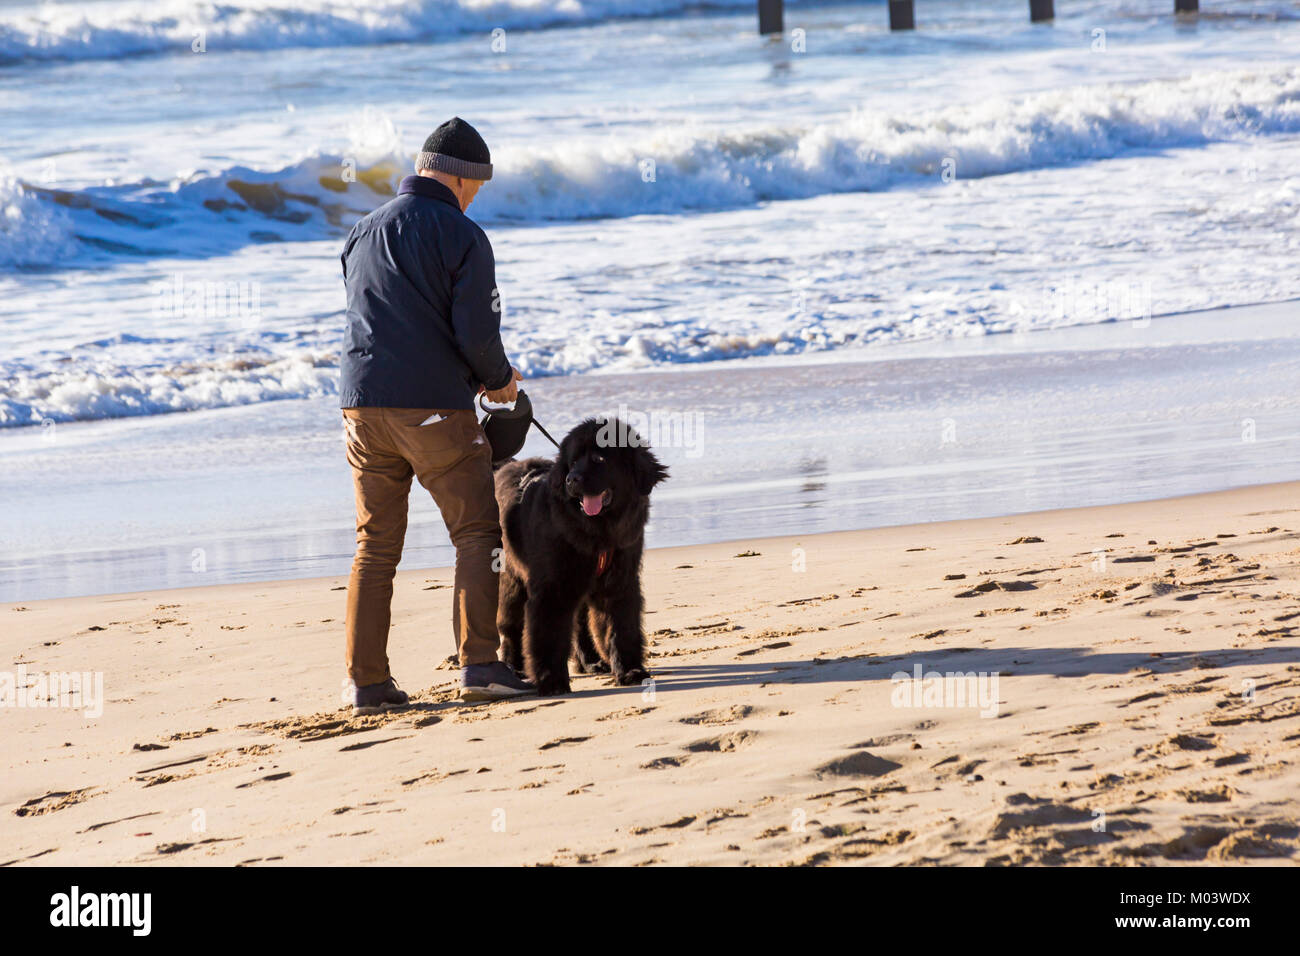 Bournemouth, Dorset, UK. 18th Jan, 2018. UK weather: after a very windy night a lovely sunny day at Bournemouth beach. Man with Newfoundland puppy at the seashore Credit: Carolyn Jenkins/Alamy Live News Stock Photo